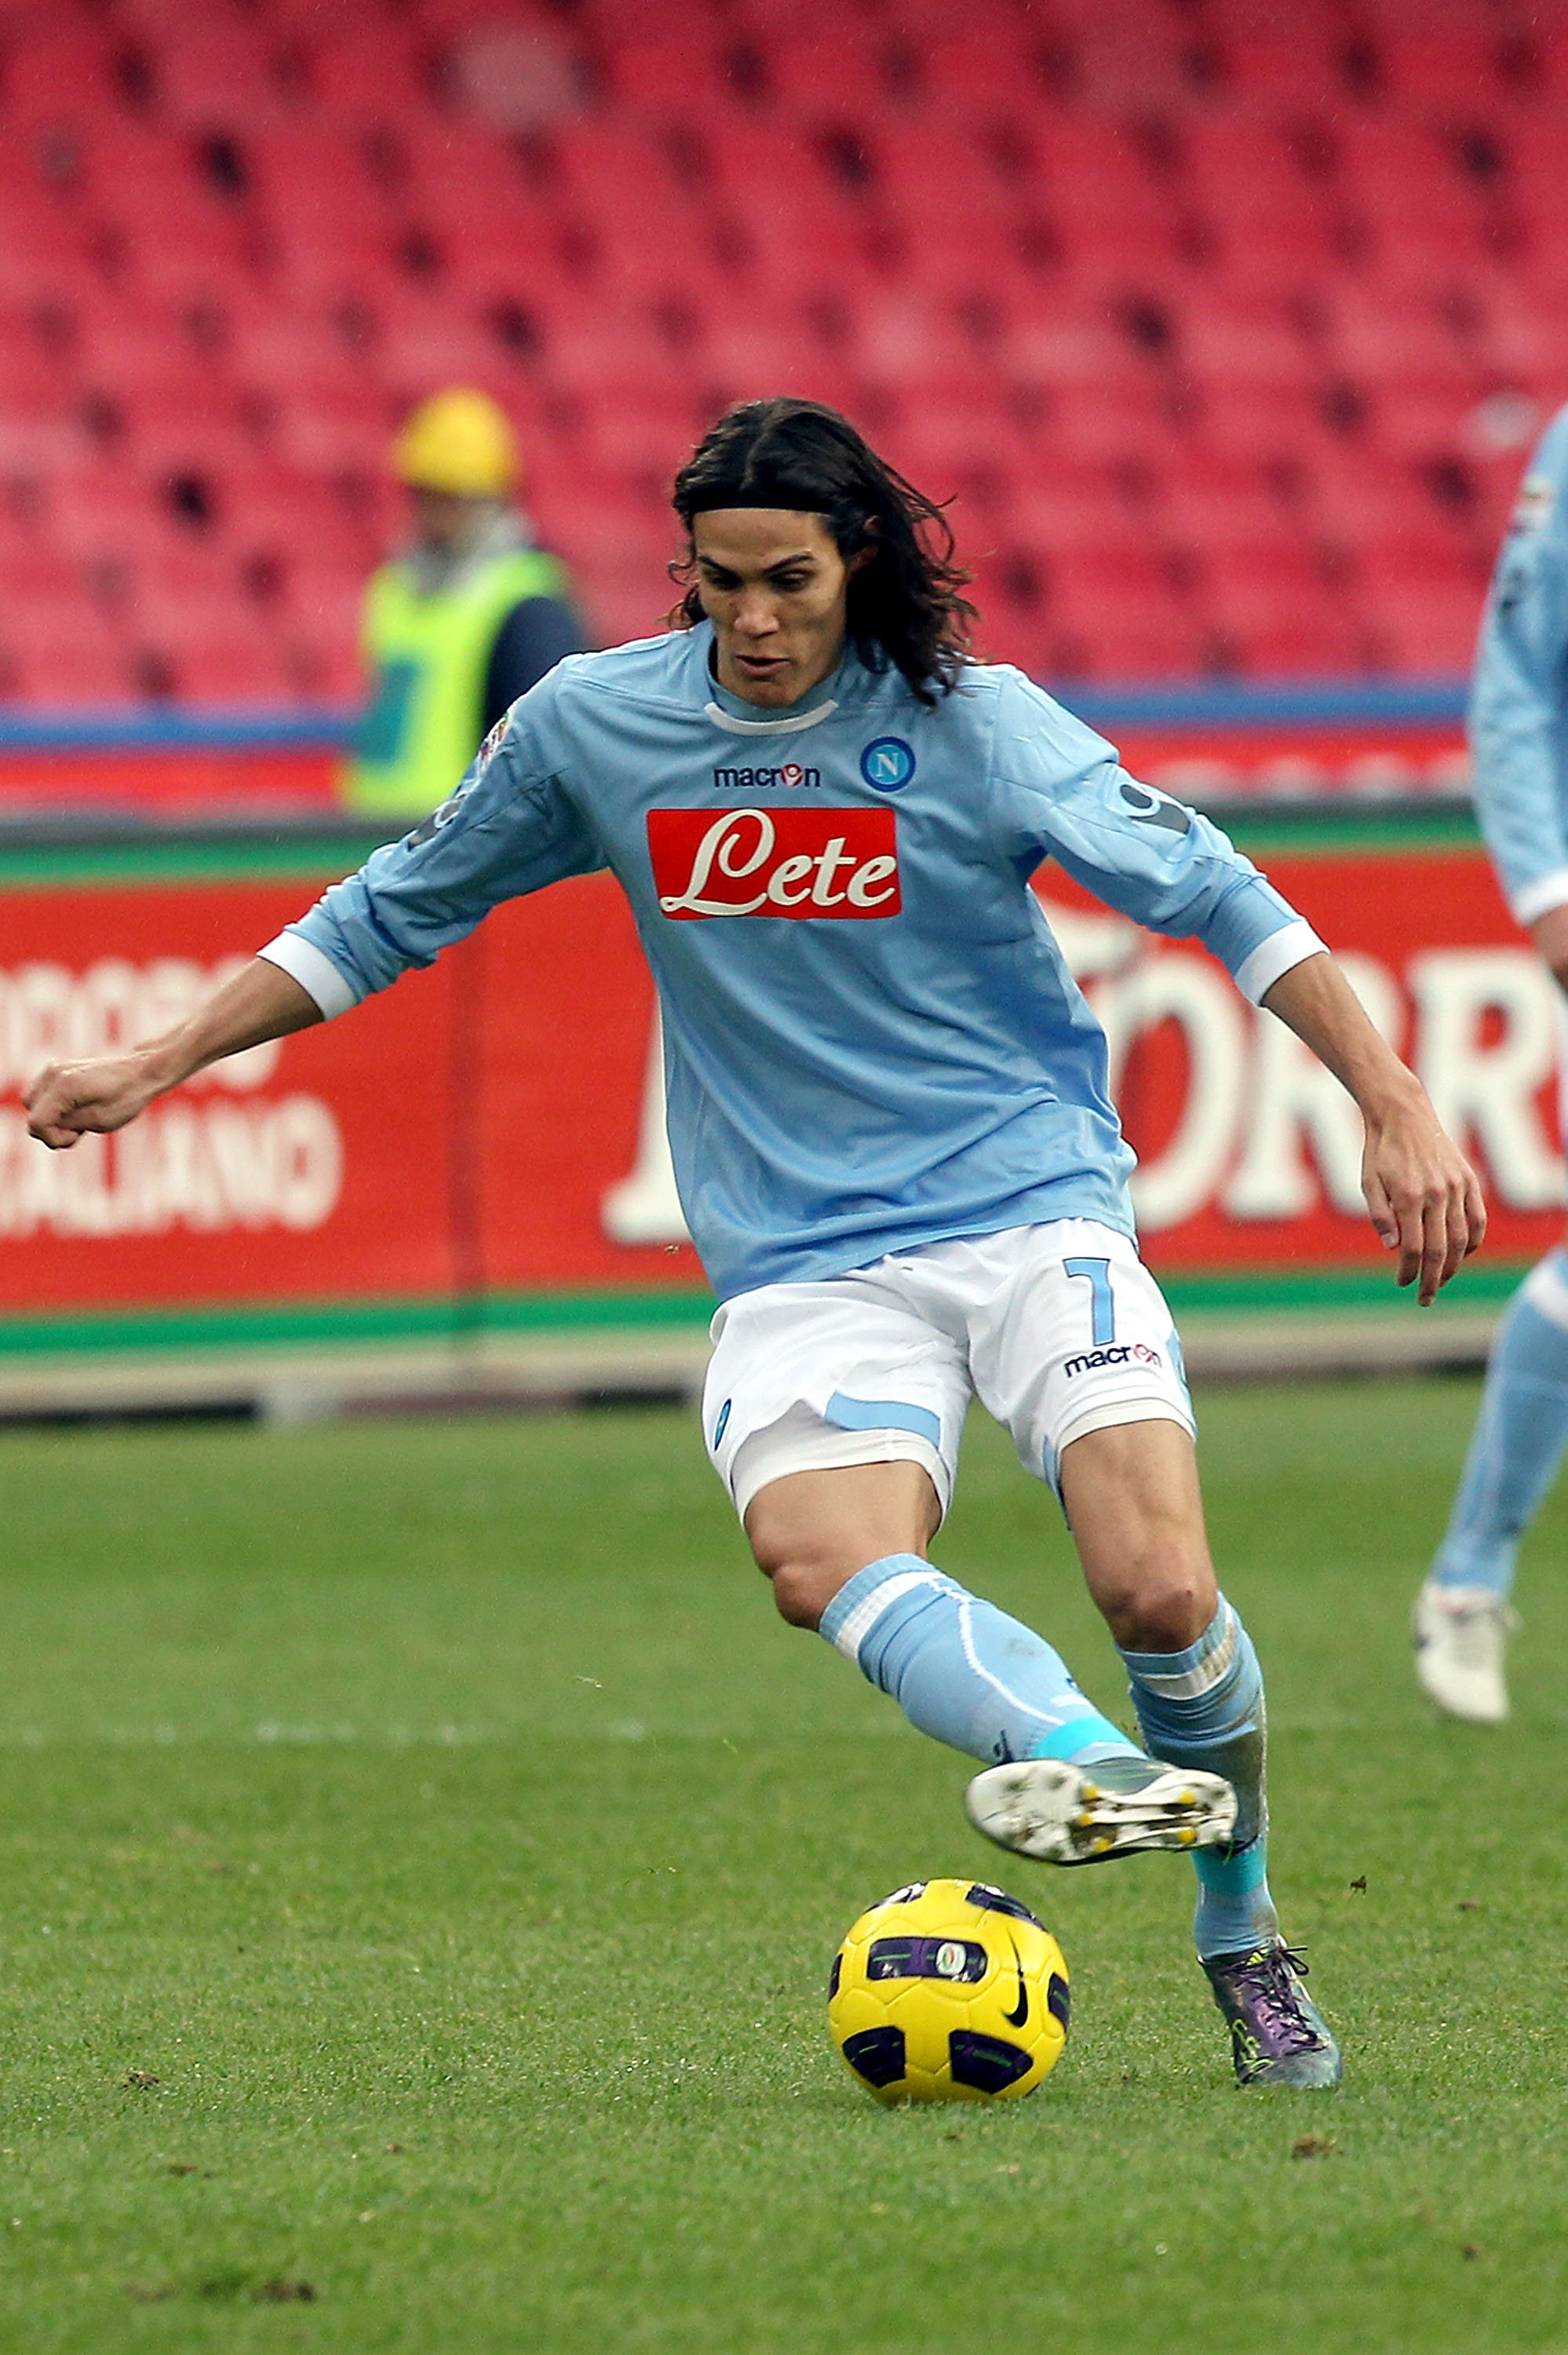 NAPLES, ITALY - DECEMBER 19:  Edinson Cavani of SSC Napoli in action during the Serie A match between Napoli and Lecce at Stadio San Paolo on December 19, 2010 in Naples, Italy.  (Photo by Gabriele Maltinti/Getty Images)